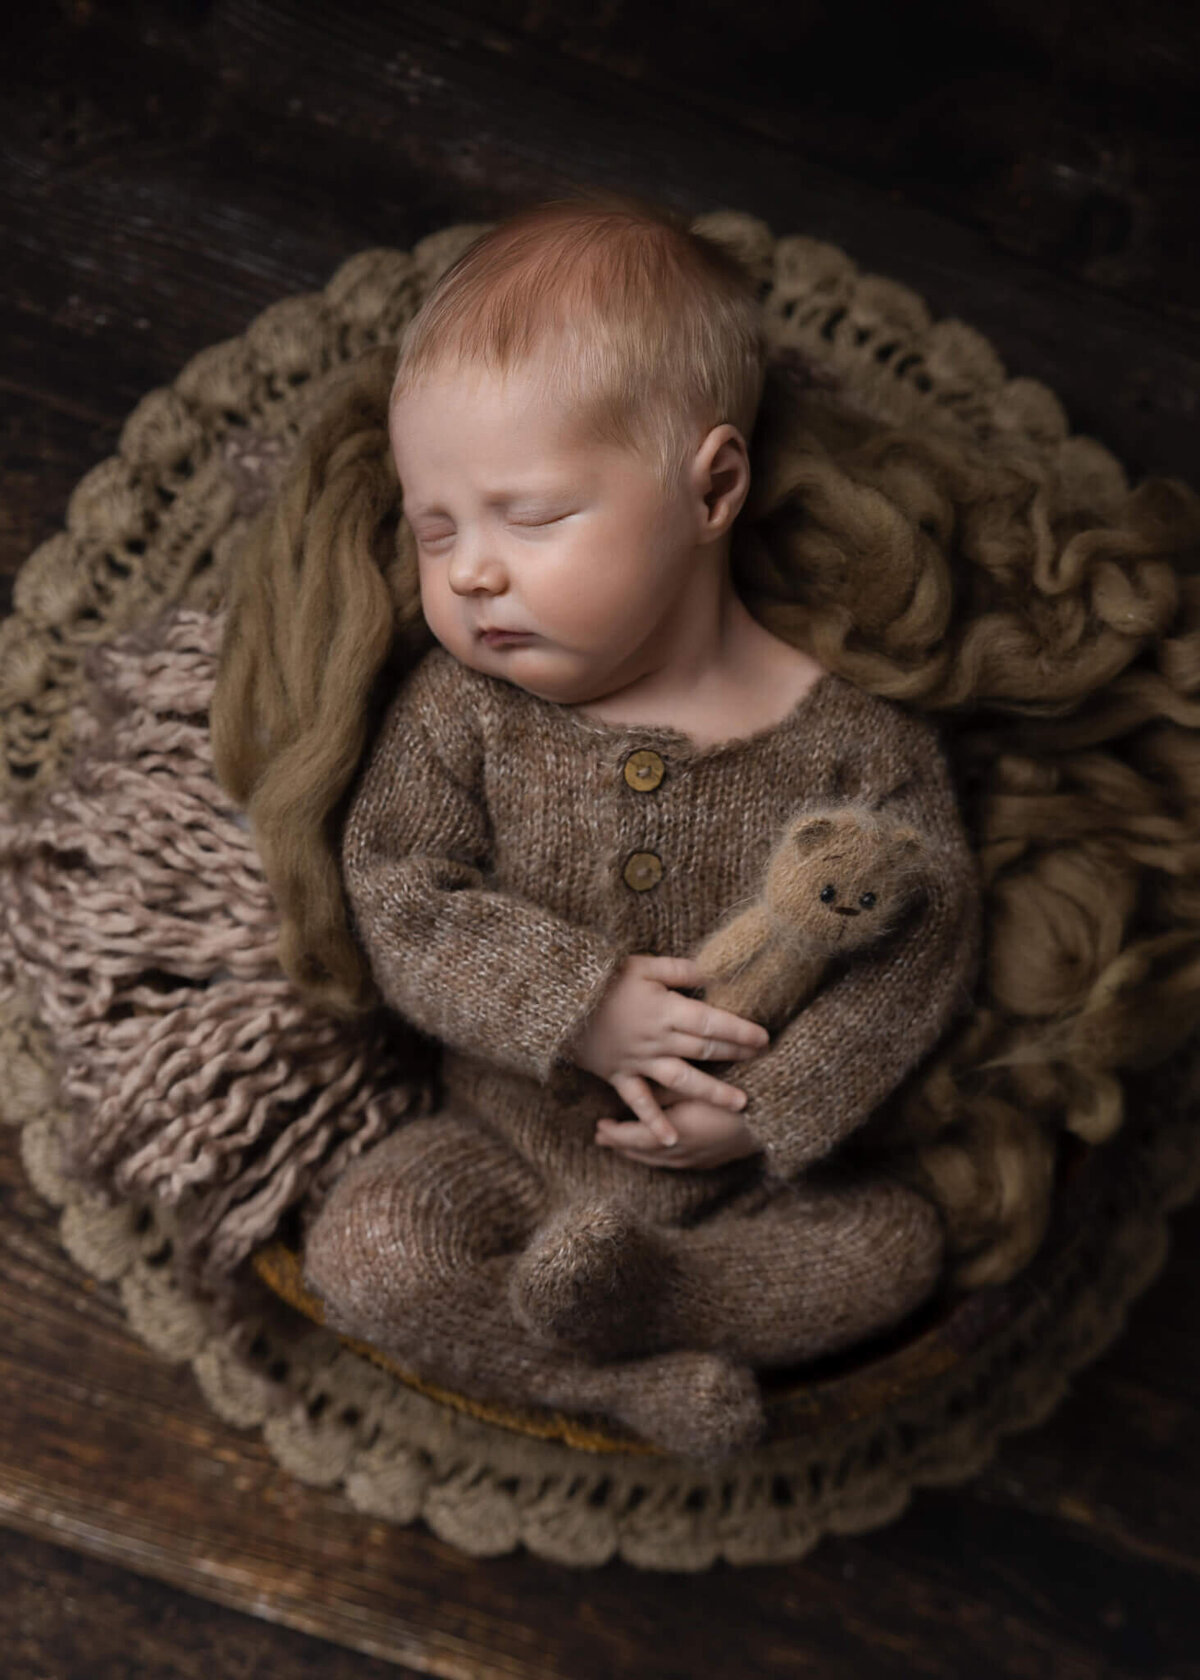 newborn baby laying in a wooden bowl holding a tiny teddy bear